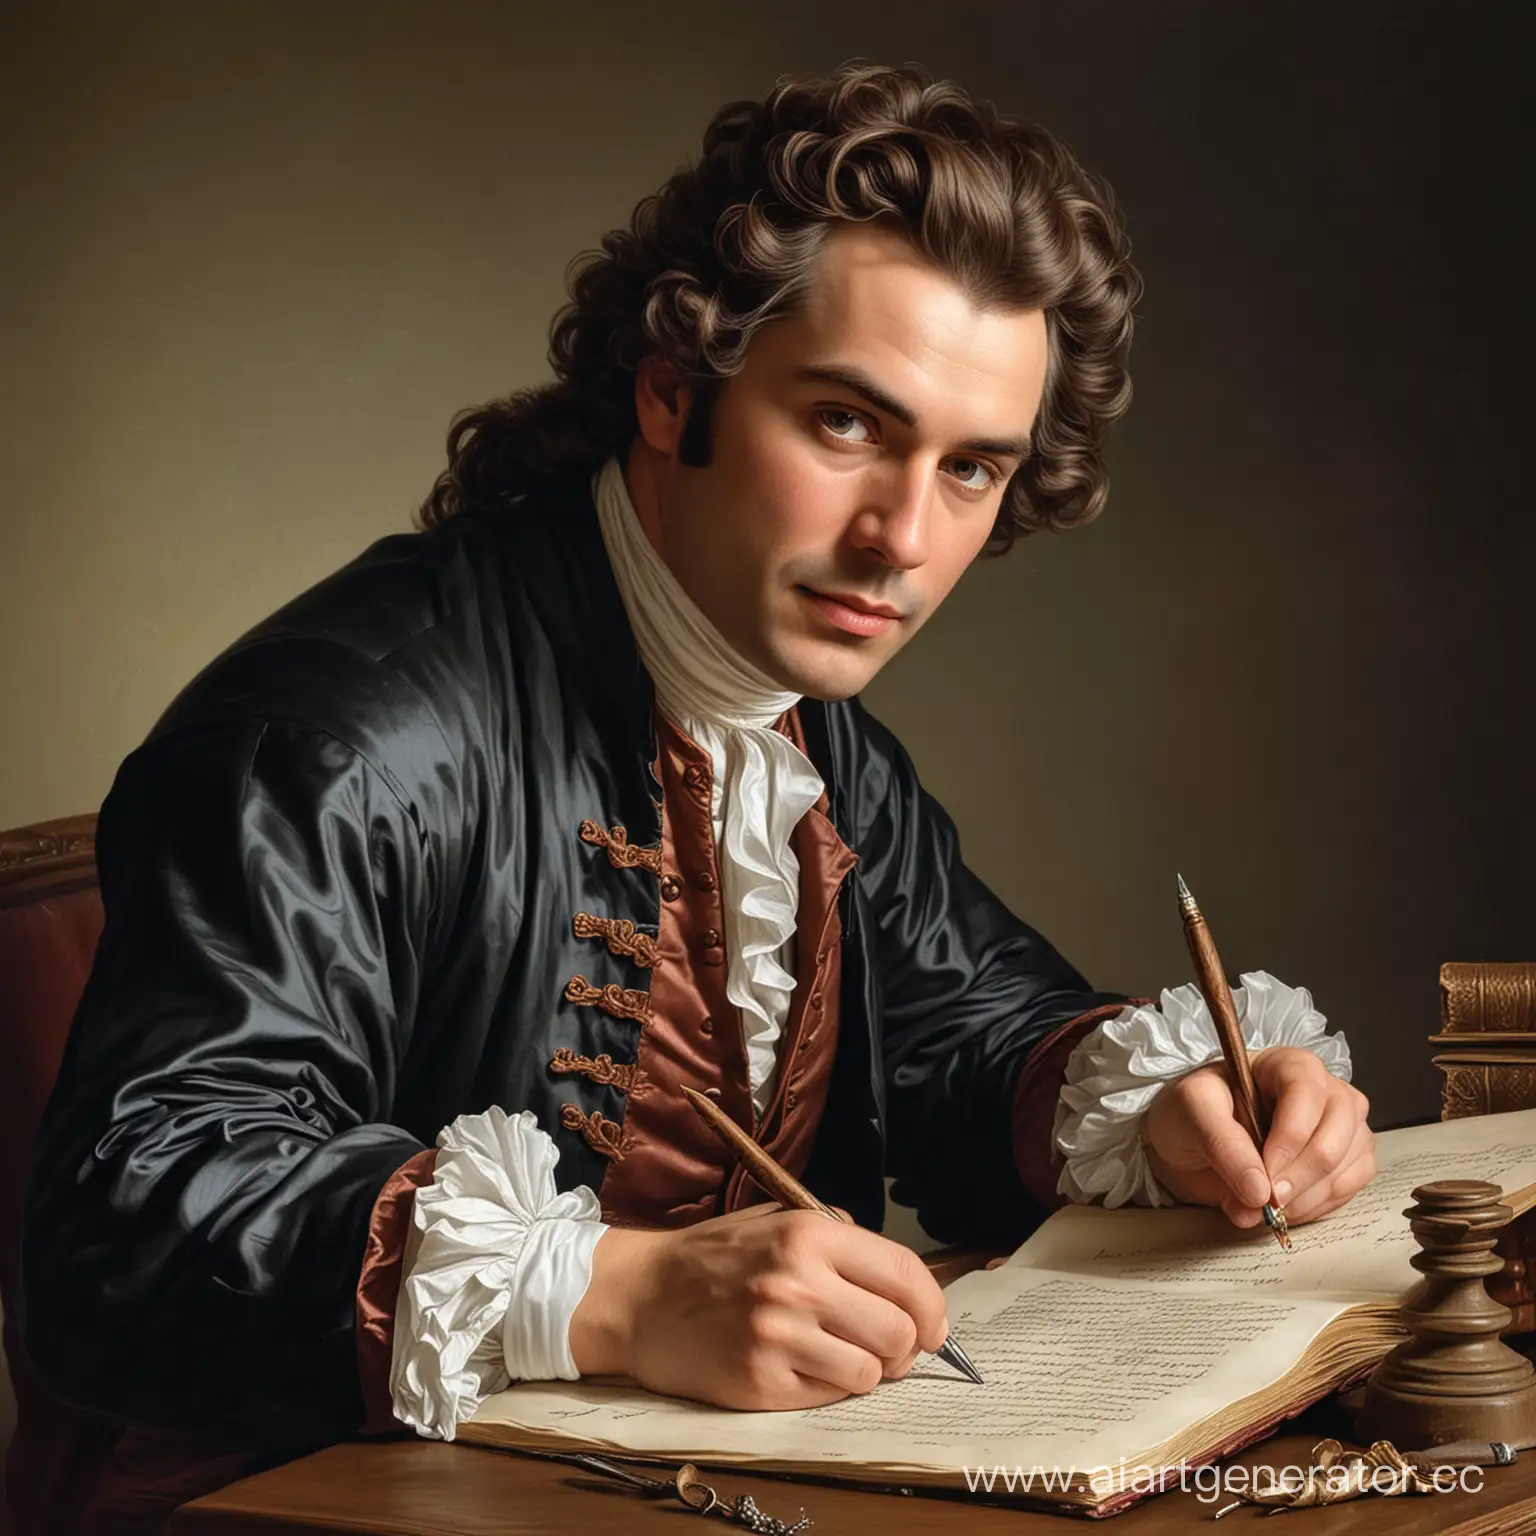 18th-Century-Male-Writer-with-Quill-Pen-Historical-Portrait-Art